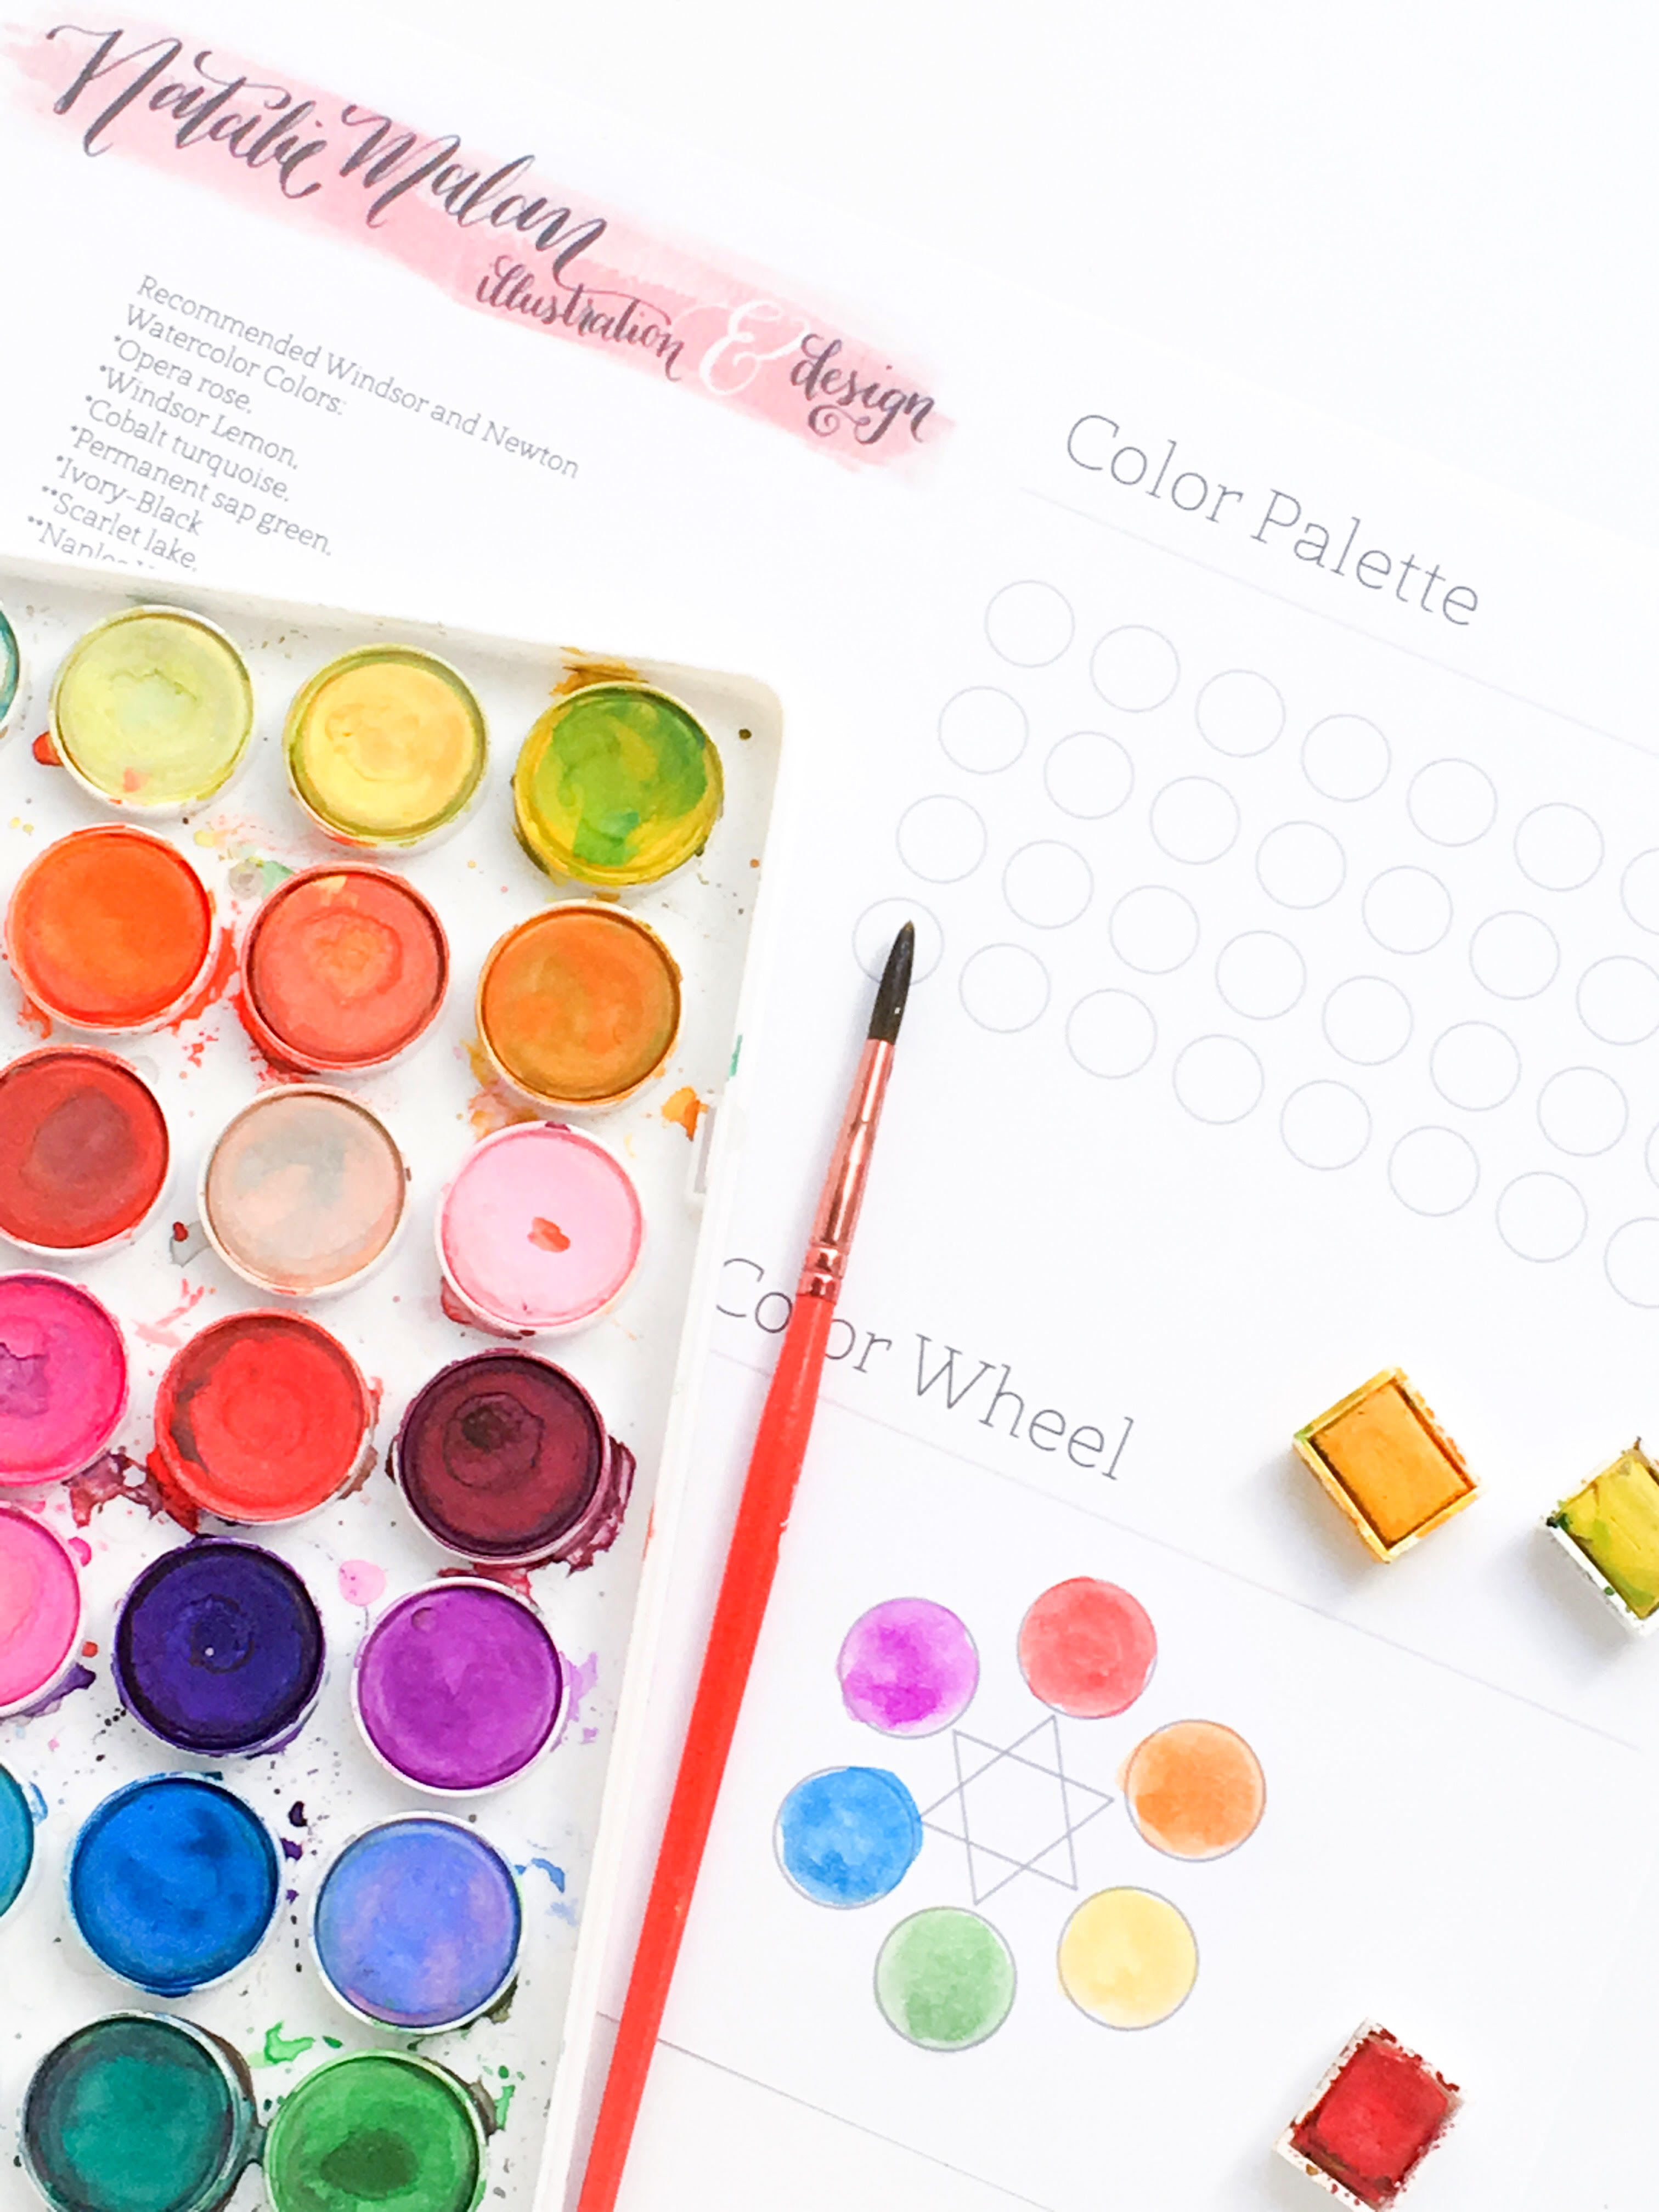 Starting a new hobby in watercolor doesn't need to be daunting. Check out our guide to watercolor for beginners from Natalie Malan on the CreativeLive blog.